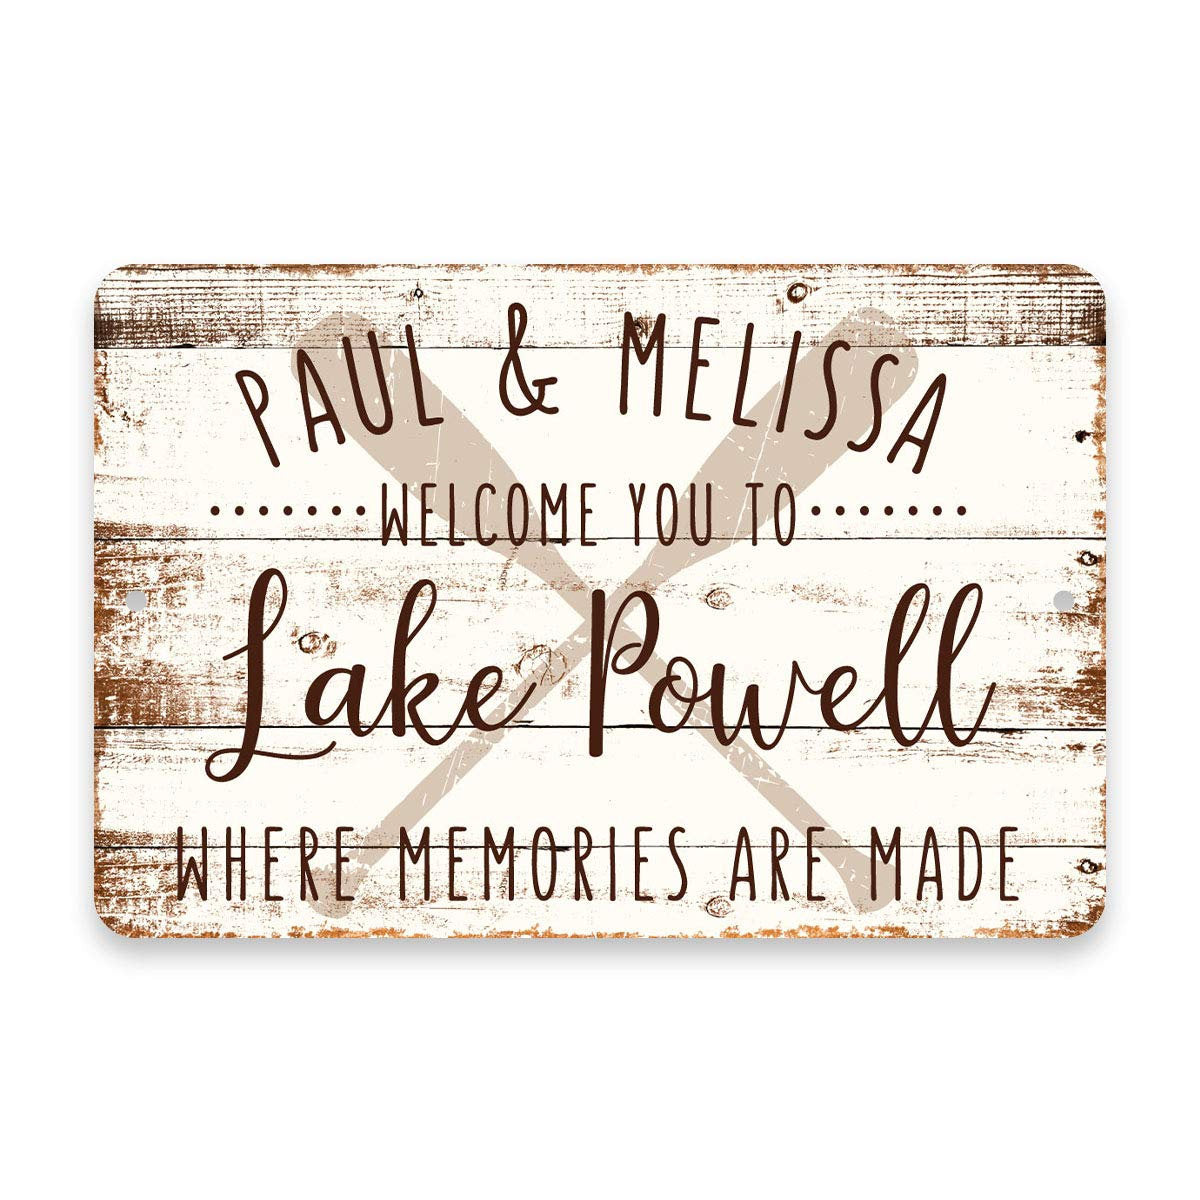 Personalized Welcome to Lake Powell Where Memories are Made Sign - 8 X 12 Metal Sign with Wood Look